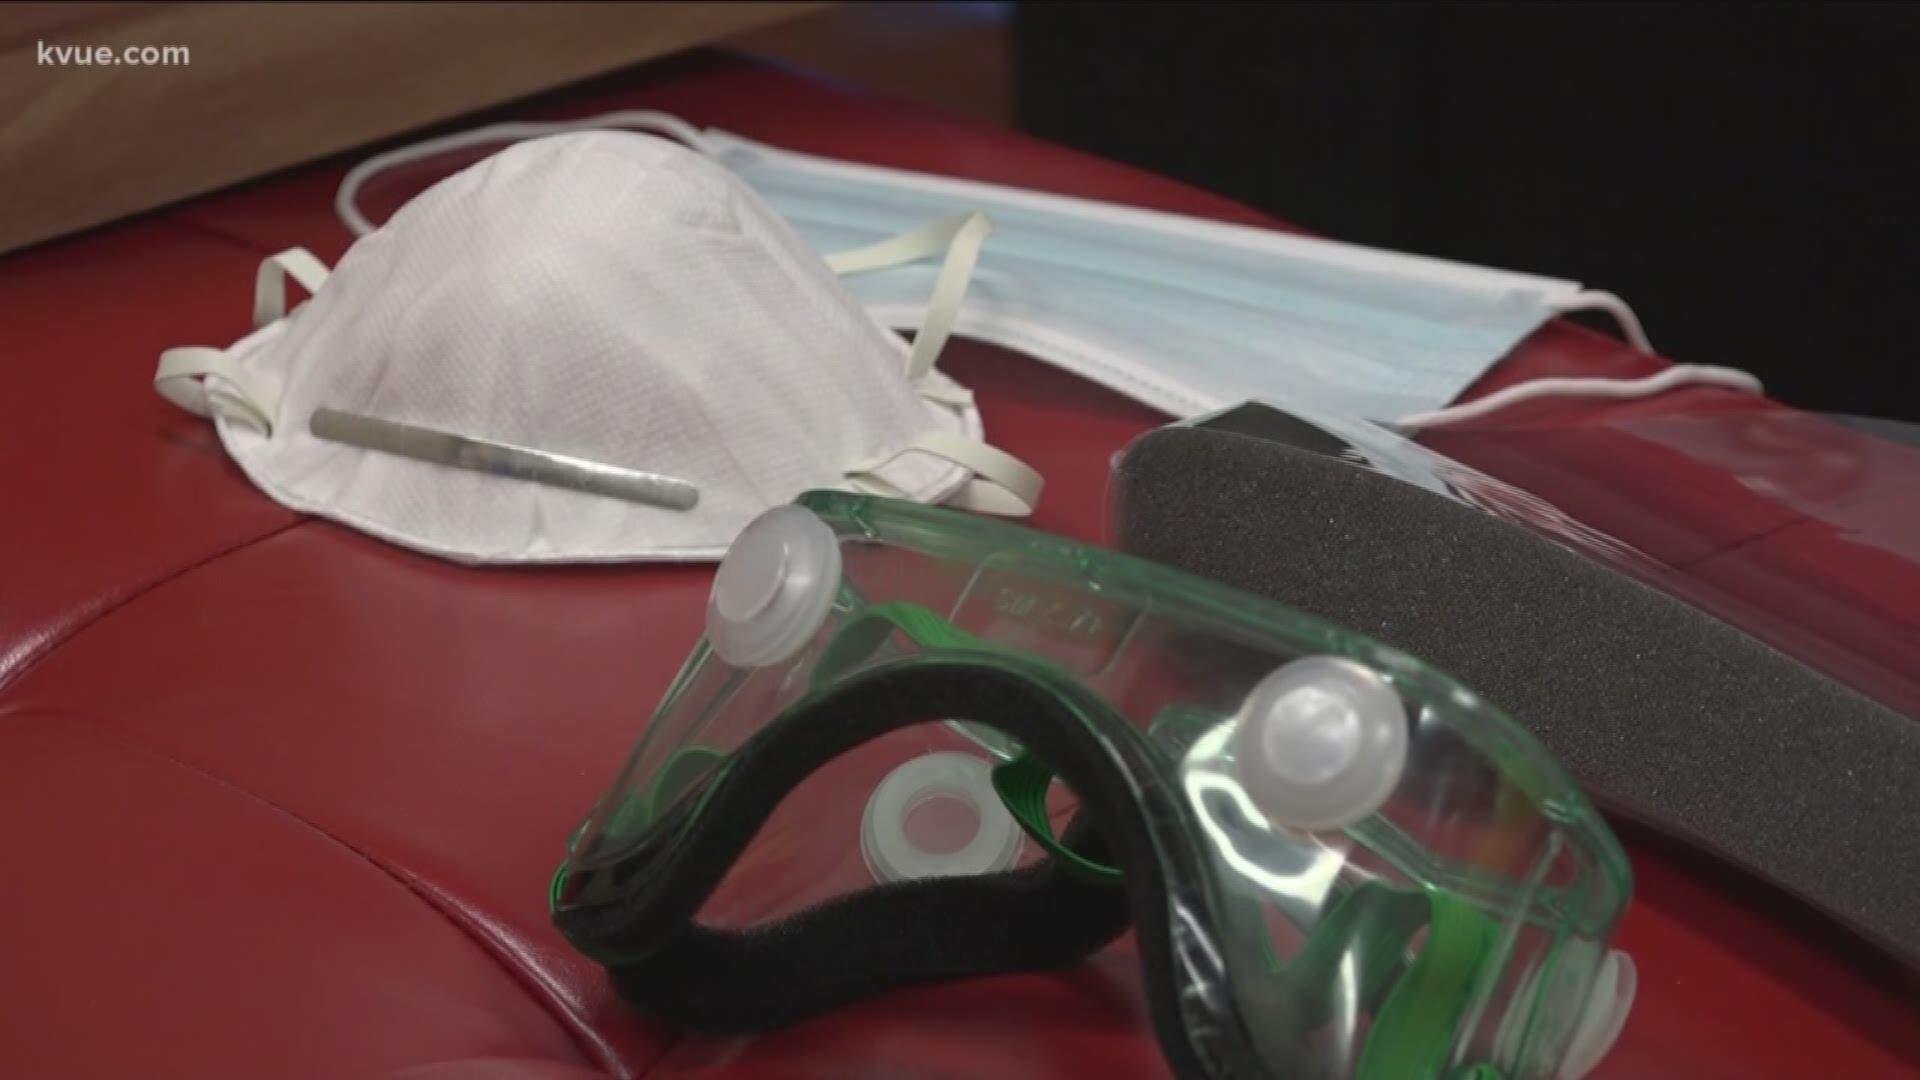 Doctors and nurses across the country say they are in desperate need of personal protective equipment like gloves, masks and gowns.